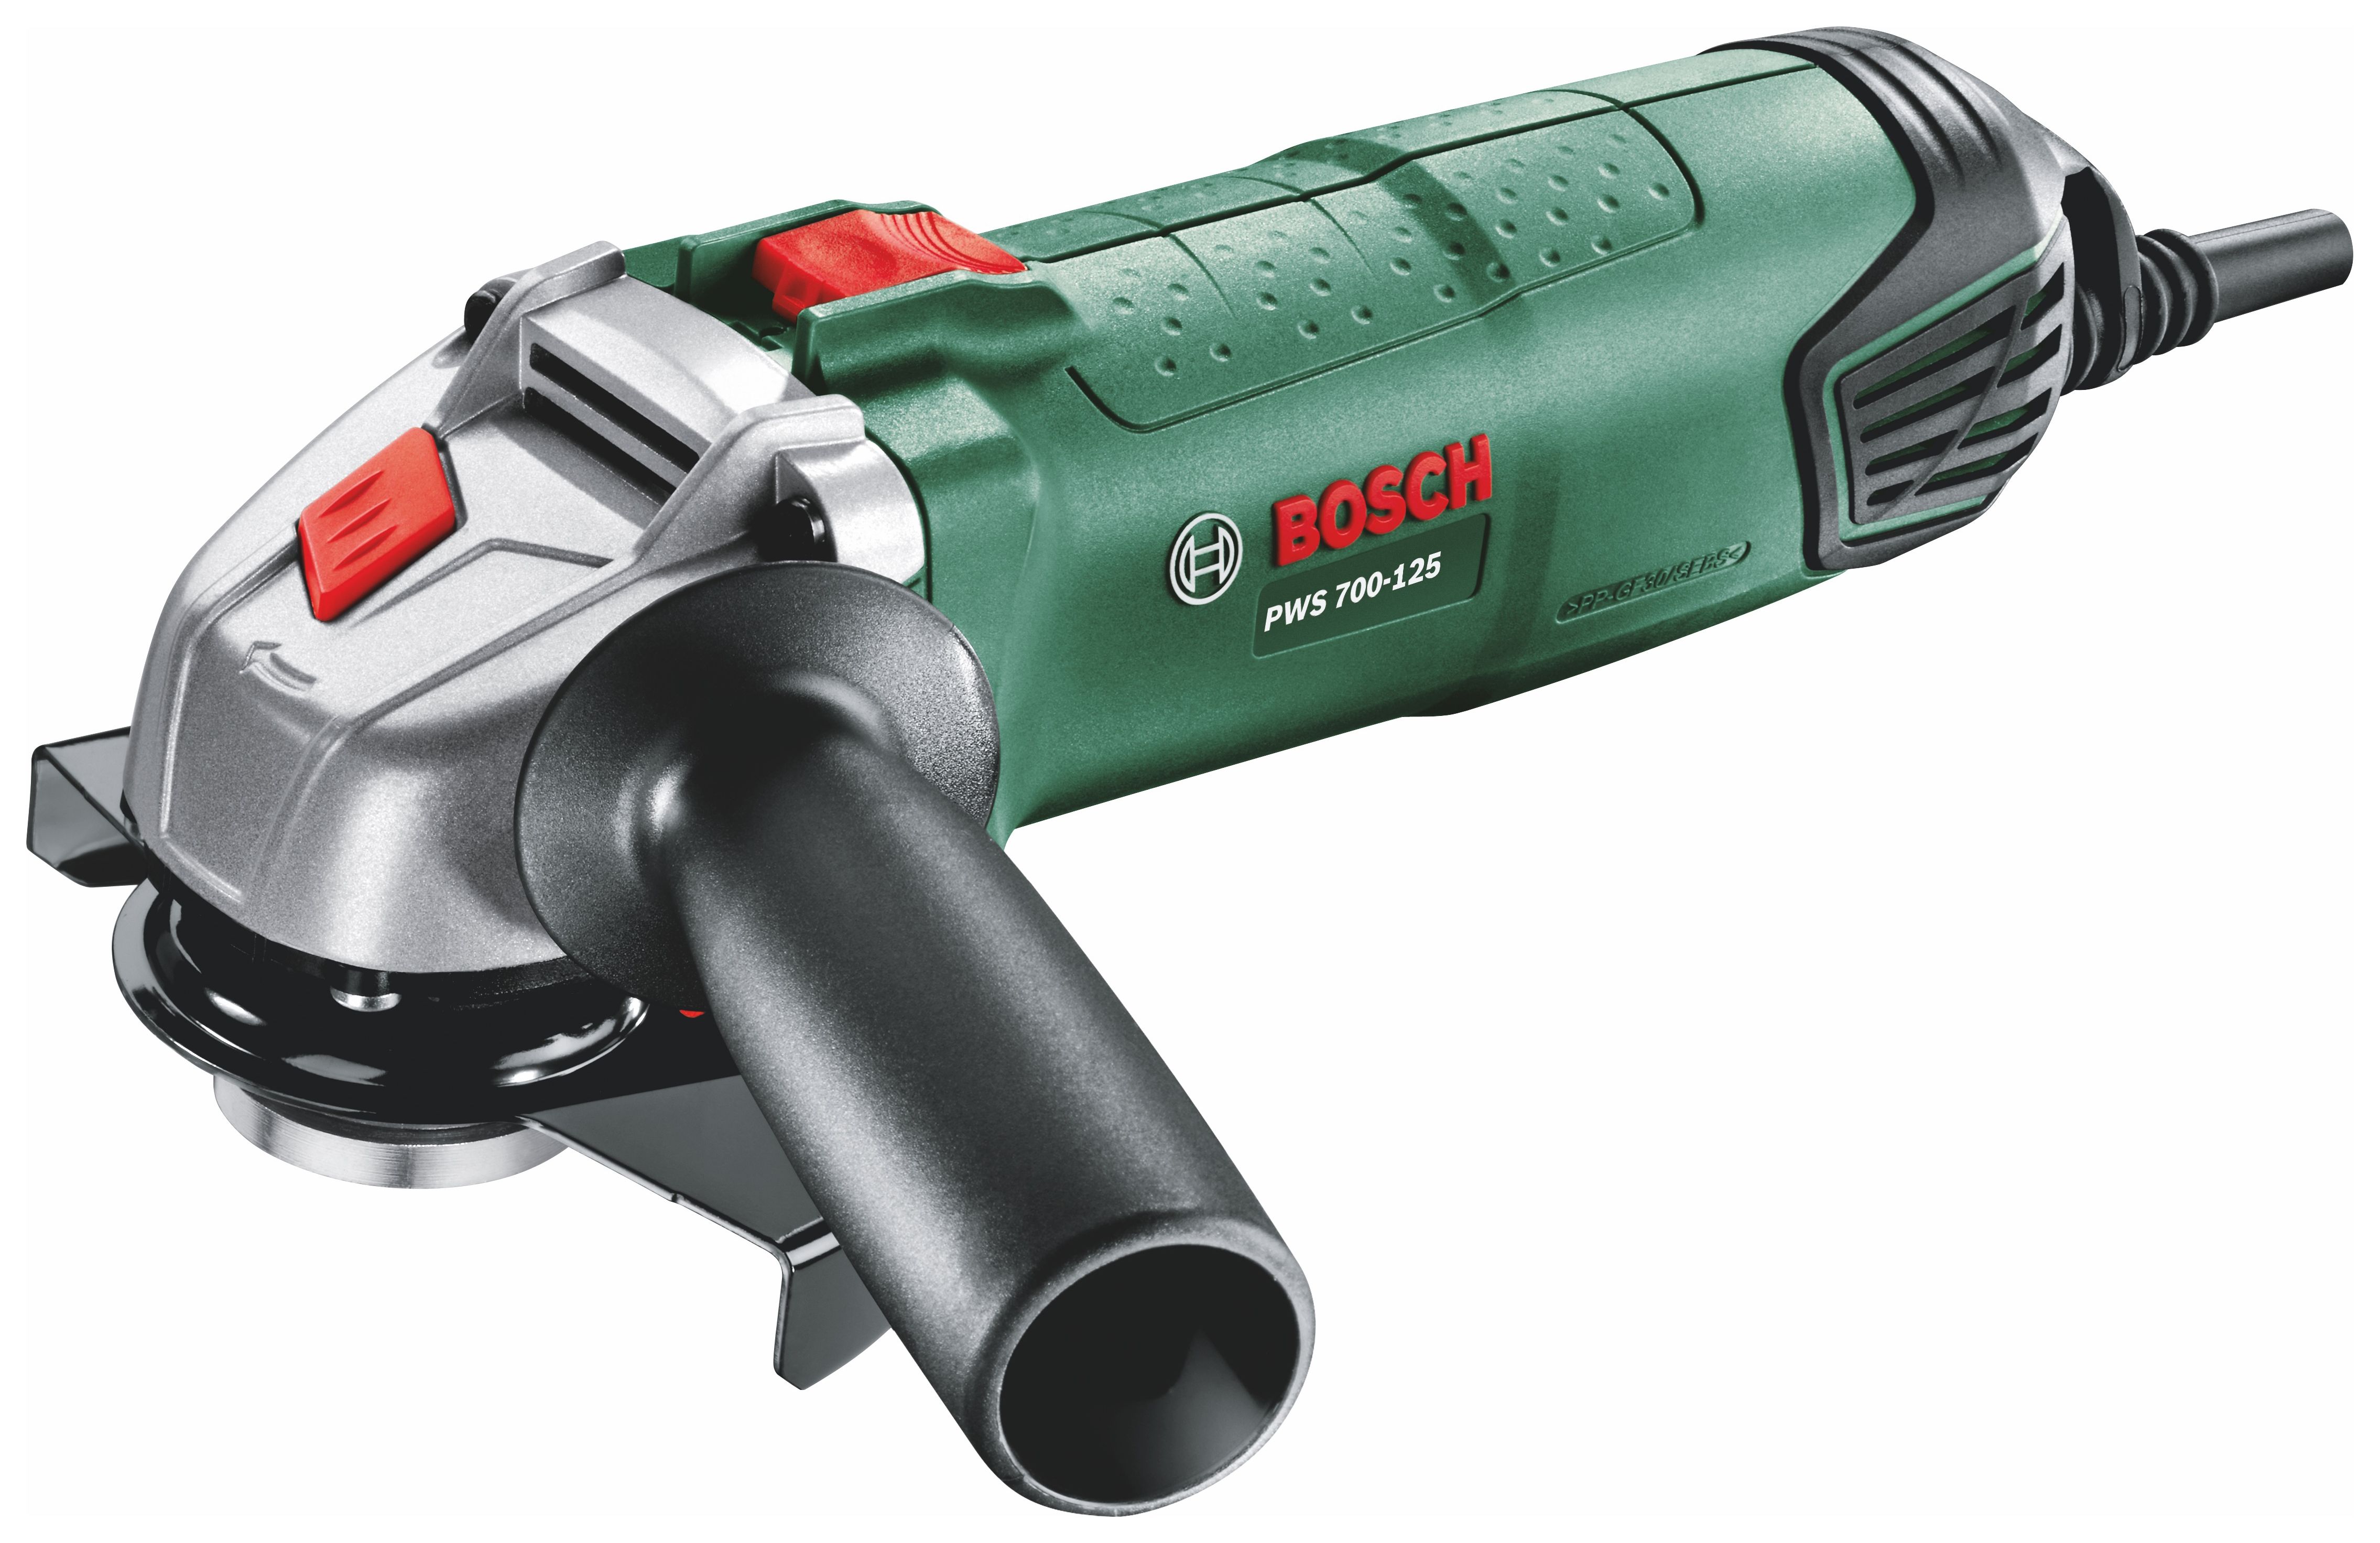 Image of Bosch PWS 700-115 115mm Corded Angle Grinder - 700W